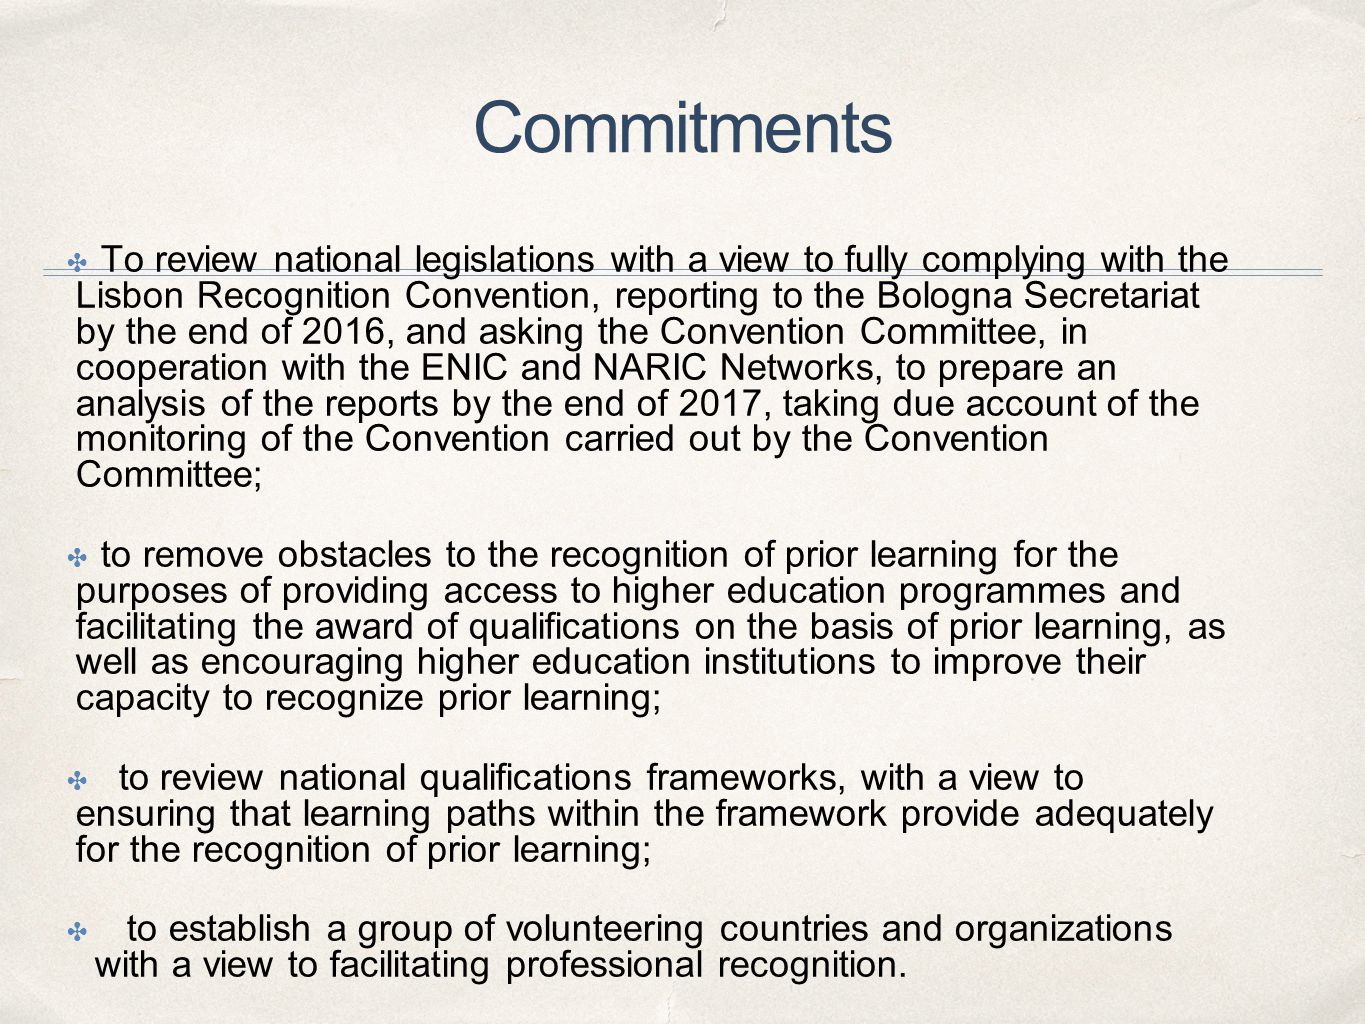 Commitments ✤ To review national legislations with a view to fully complying with the Lisbon Recognition Convention, reporting to the Bologna Secretariat by the end of 2016, and asking the Convention Committee, in cooperation with the ENIC and NARIC Networks, to prepare an analysis of the reports by the end of 2017, taking due account of the monitoring of the Convention carried out by the Convention Committee; ✤ to remove obstacles to the recognition of prior learning for the purposes of providing access to higher education programmes and facilitating the award of qualifications on the basis of prior learning, as well as encouraging higher education institutions to improve their capacity to recognize prior learning; ✤ to review national qualifications frameworks, with a view to ensuring that learning paths within the framework provide adequately for the recognition of prior learning; ✤ to establish a group of volunteering countries and organizations with a view to facilitating professional recognition.